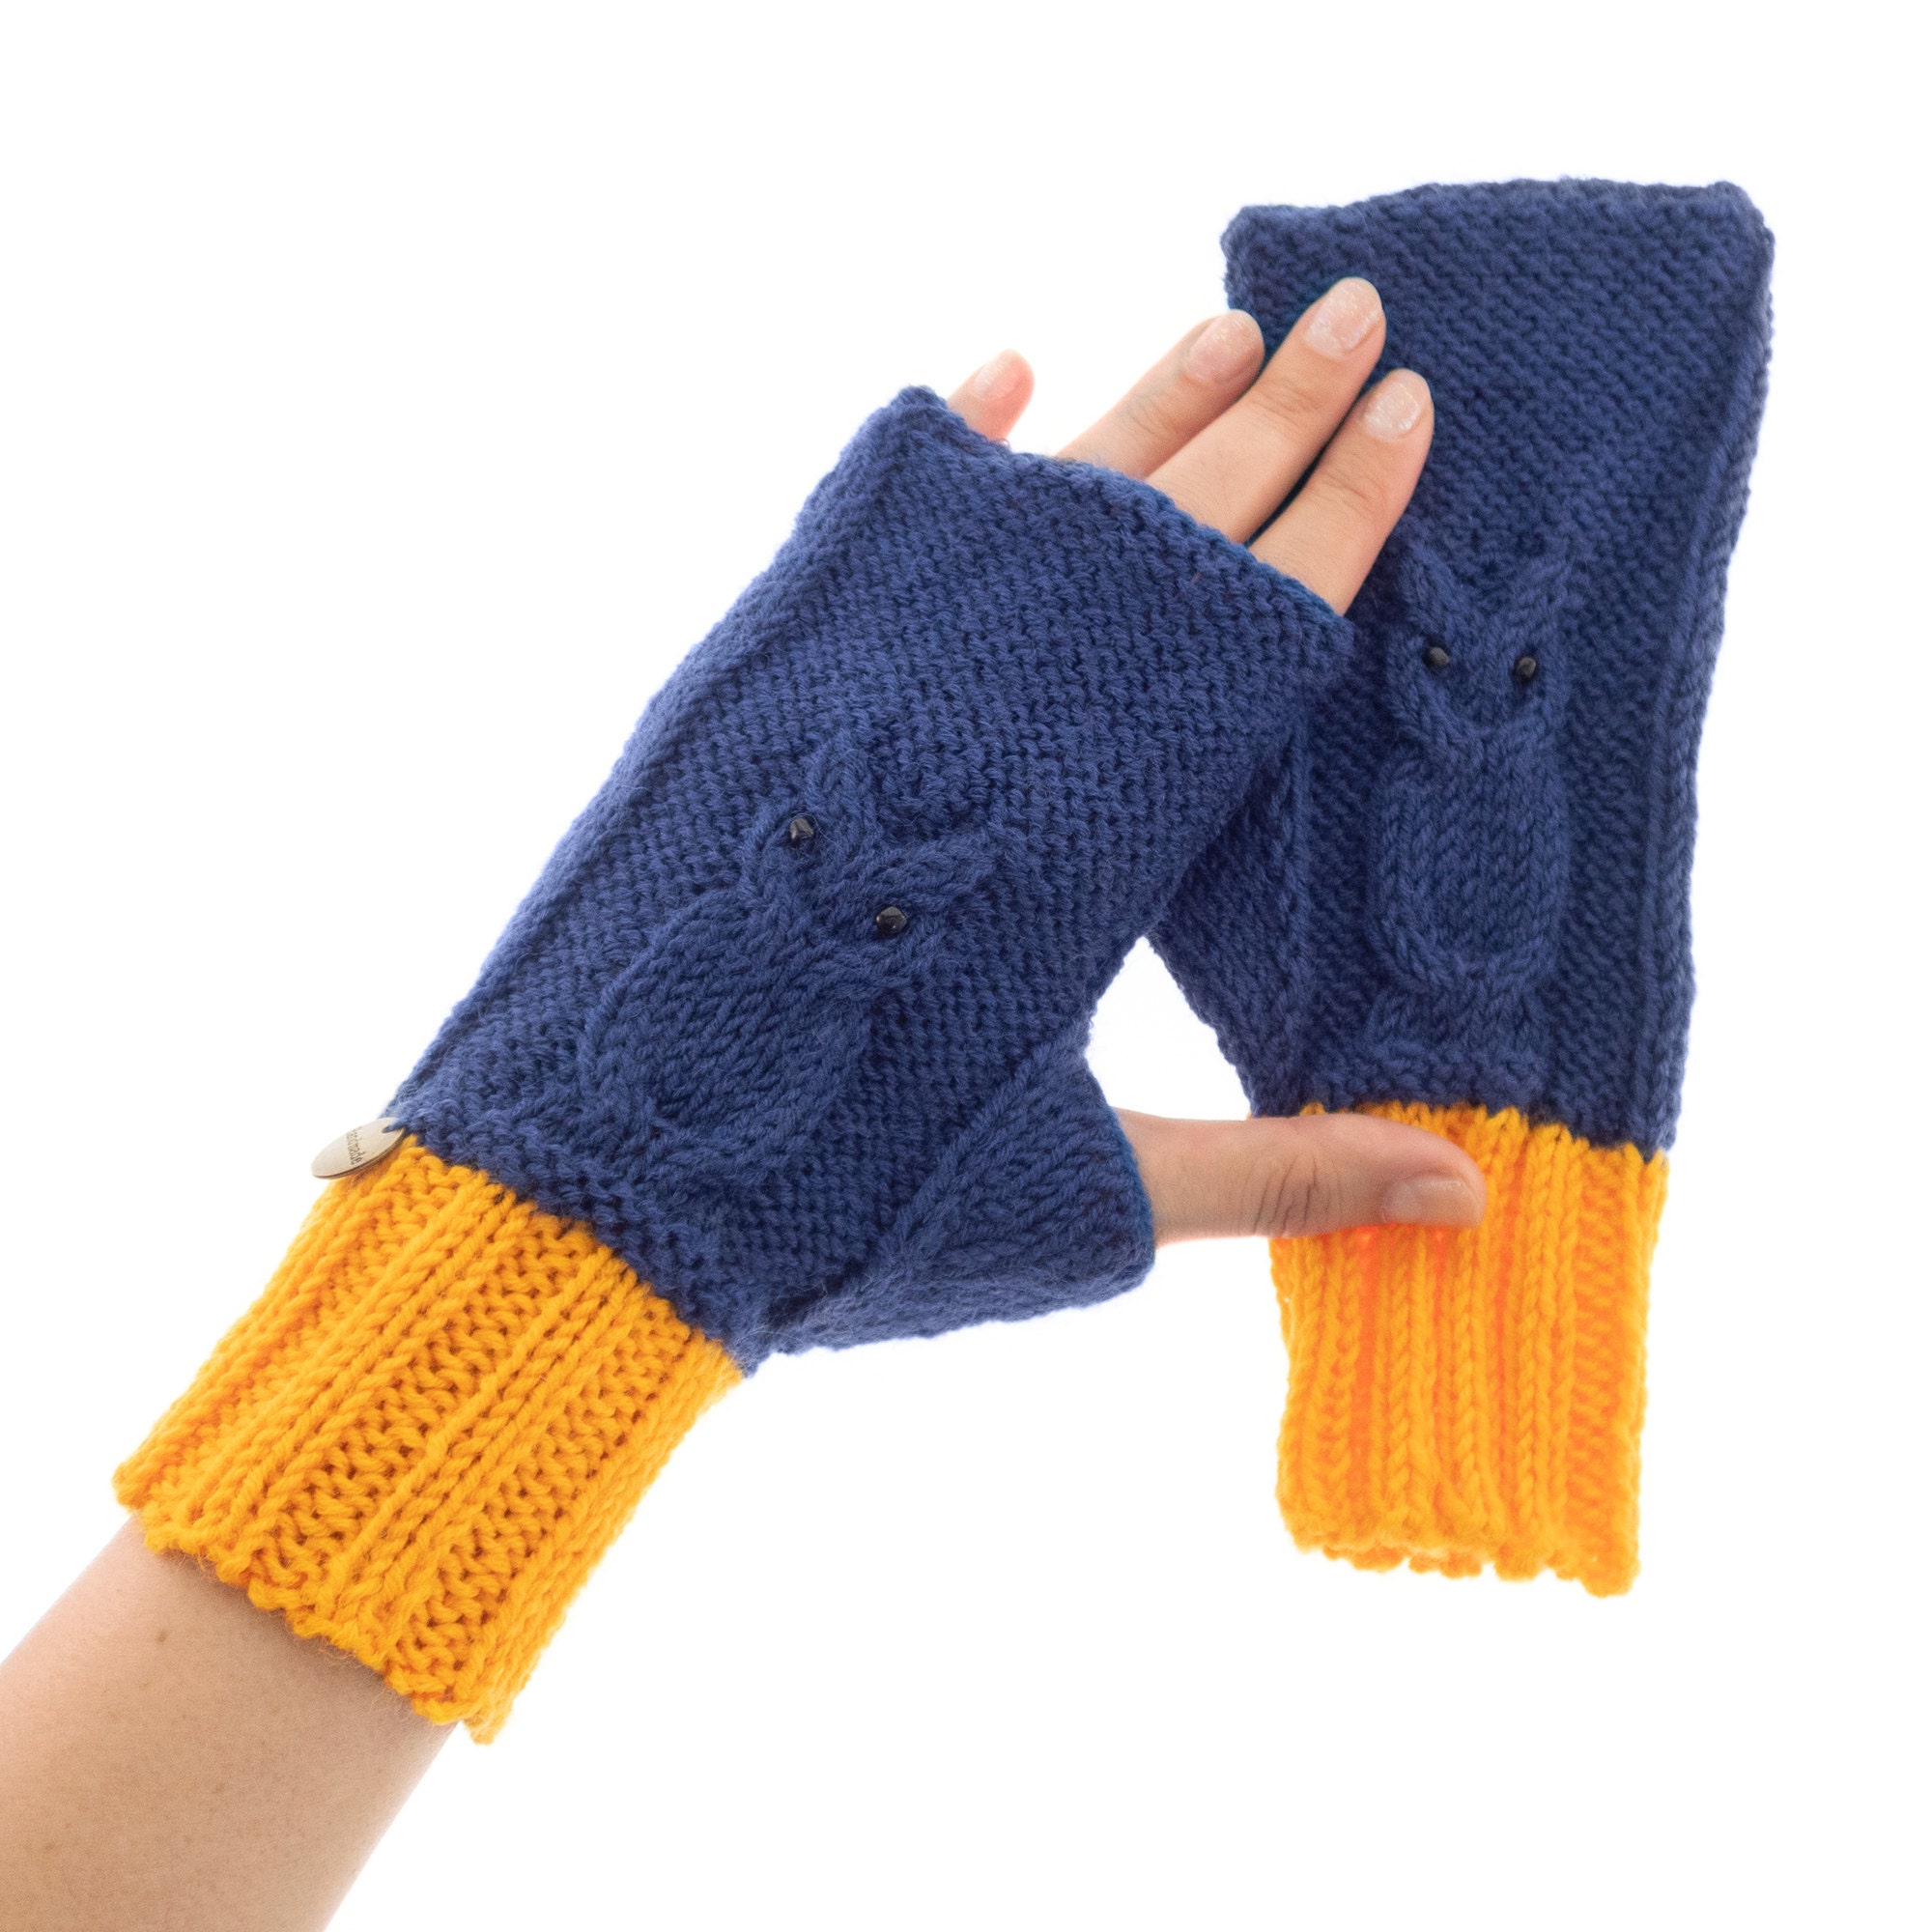 Womens Texting Mittens, Knitted Gloves Fingerless